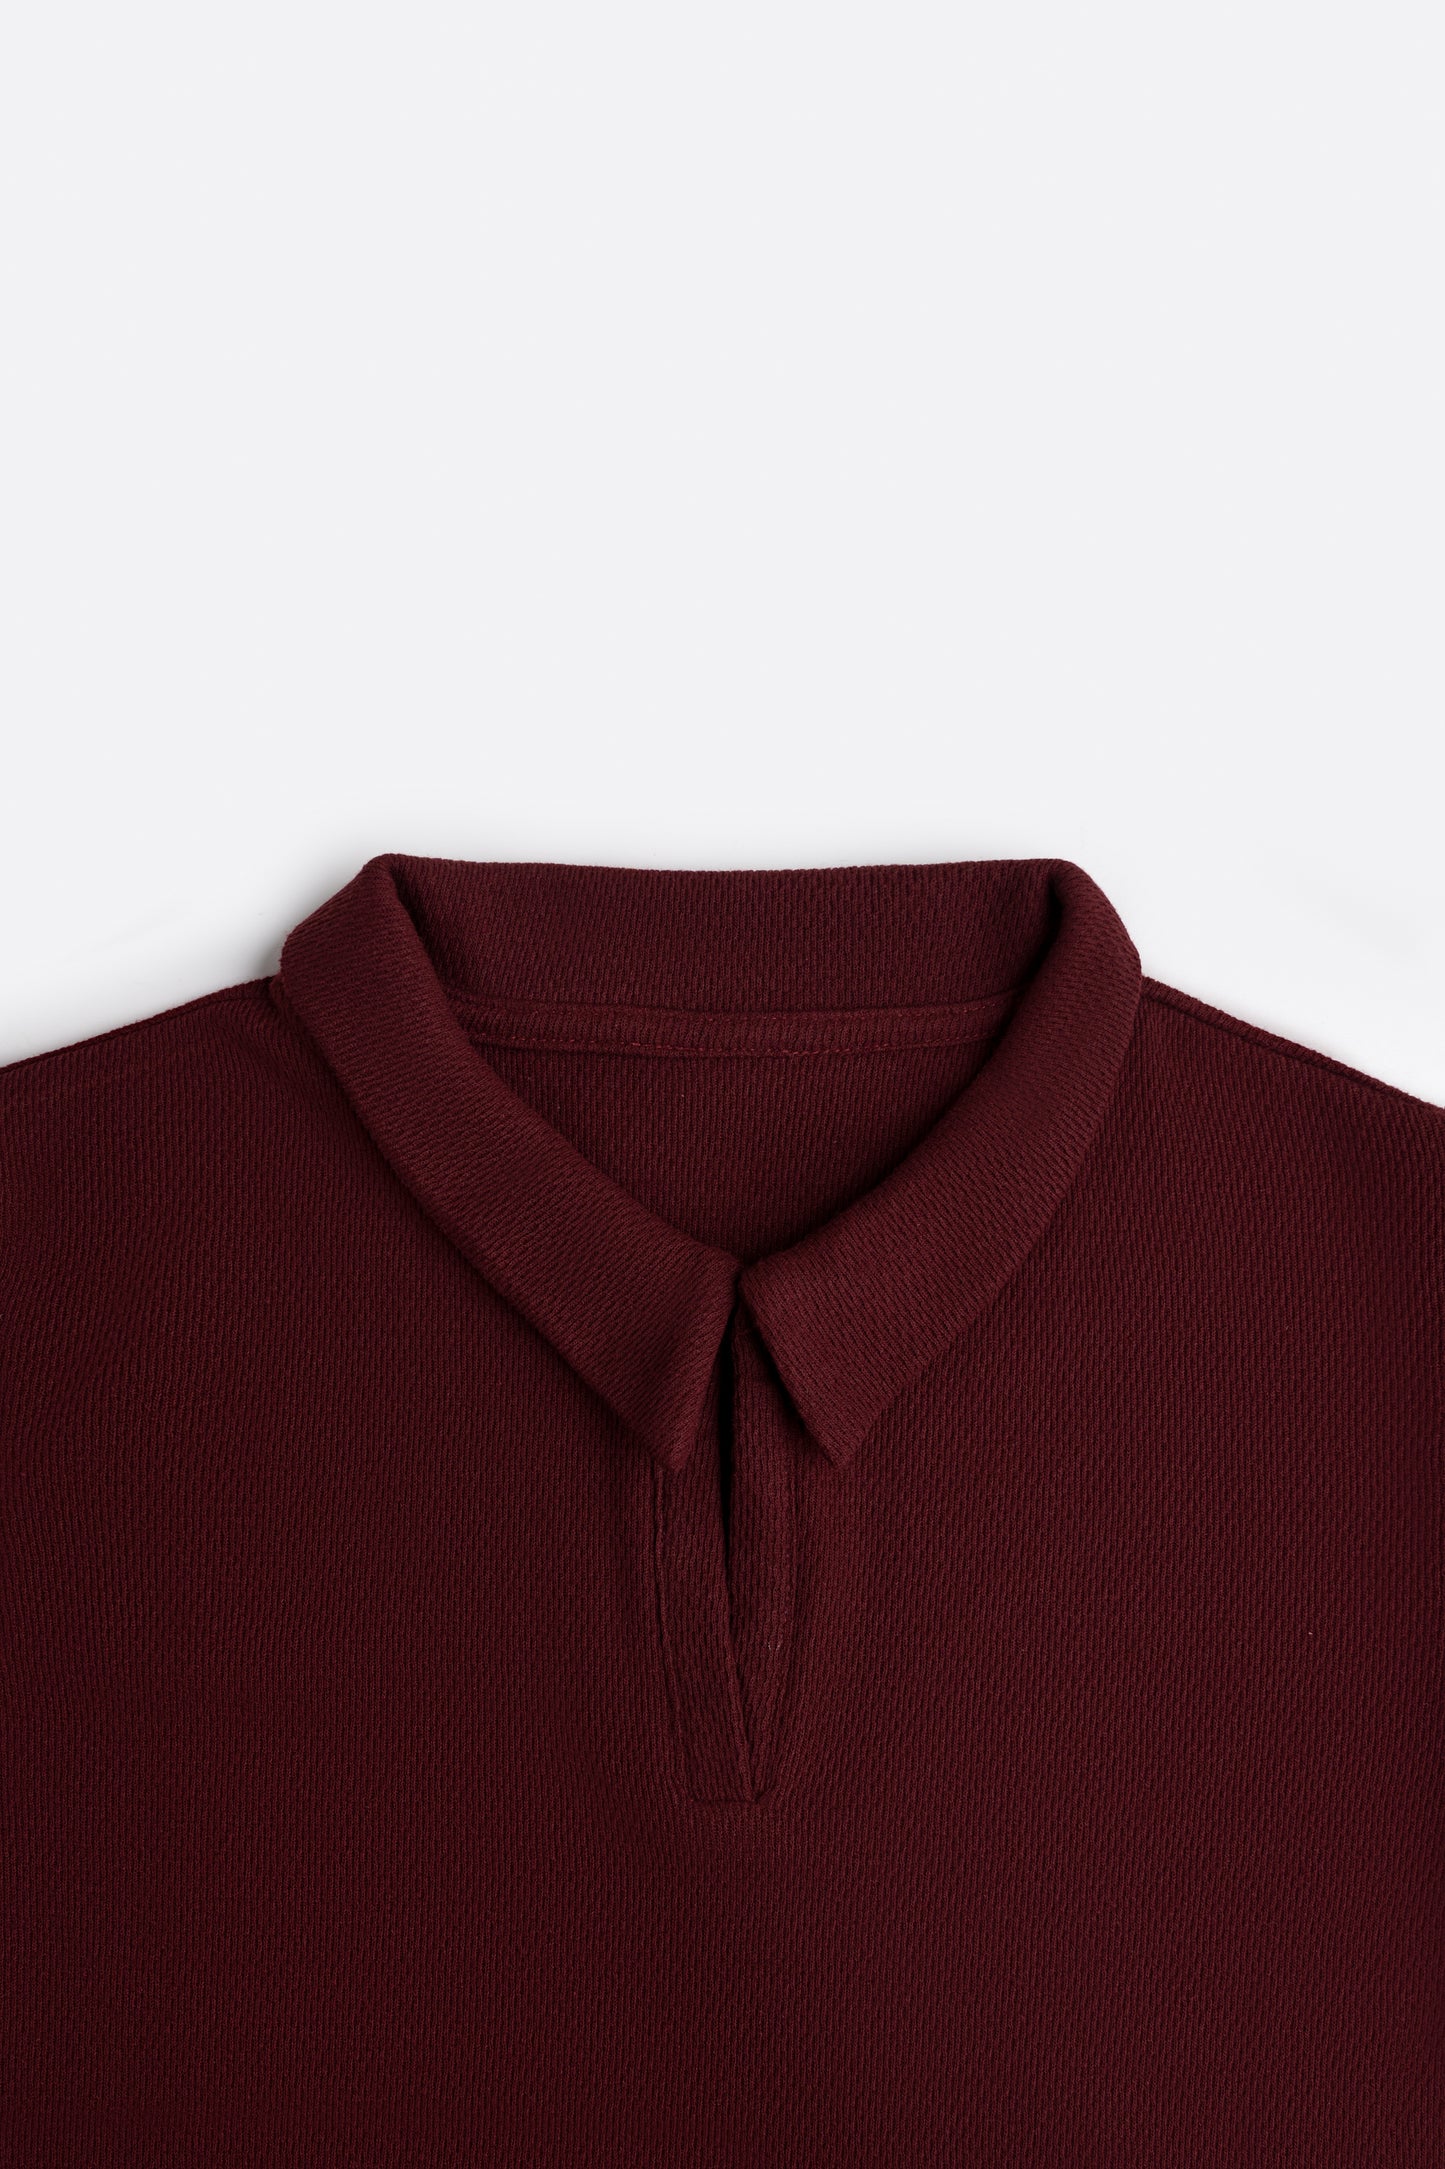 Cropped Textured Polo Top in Rosewood